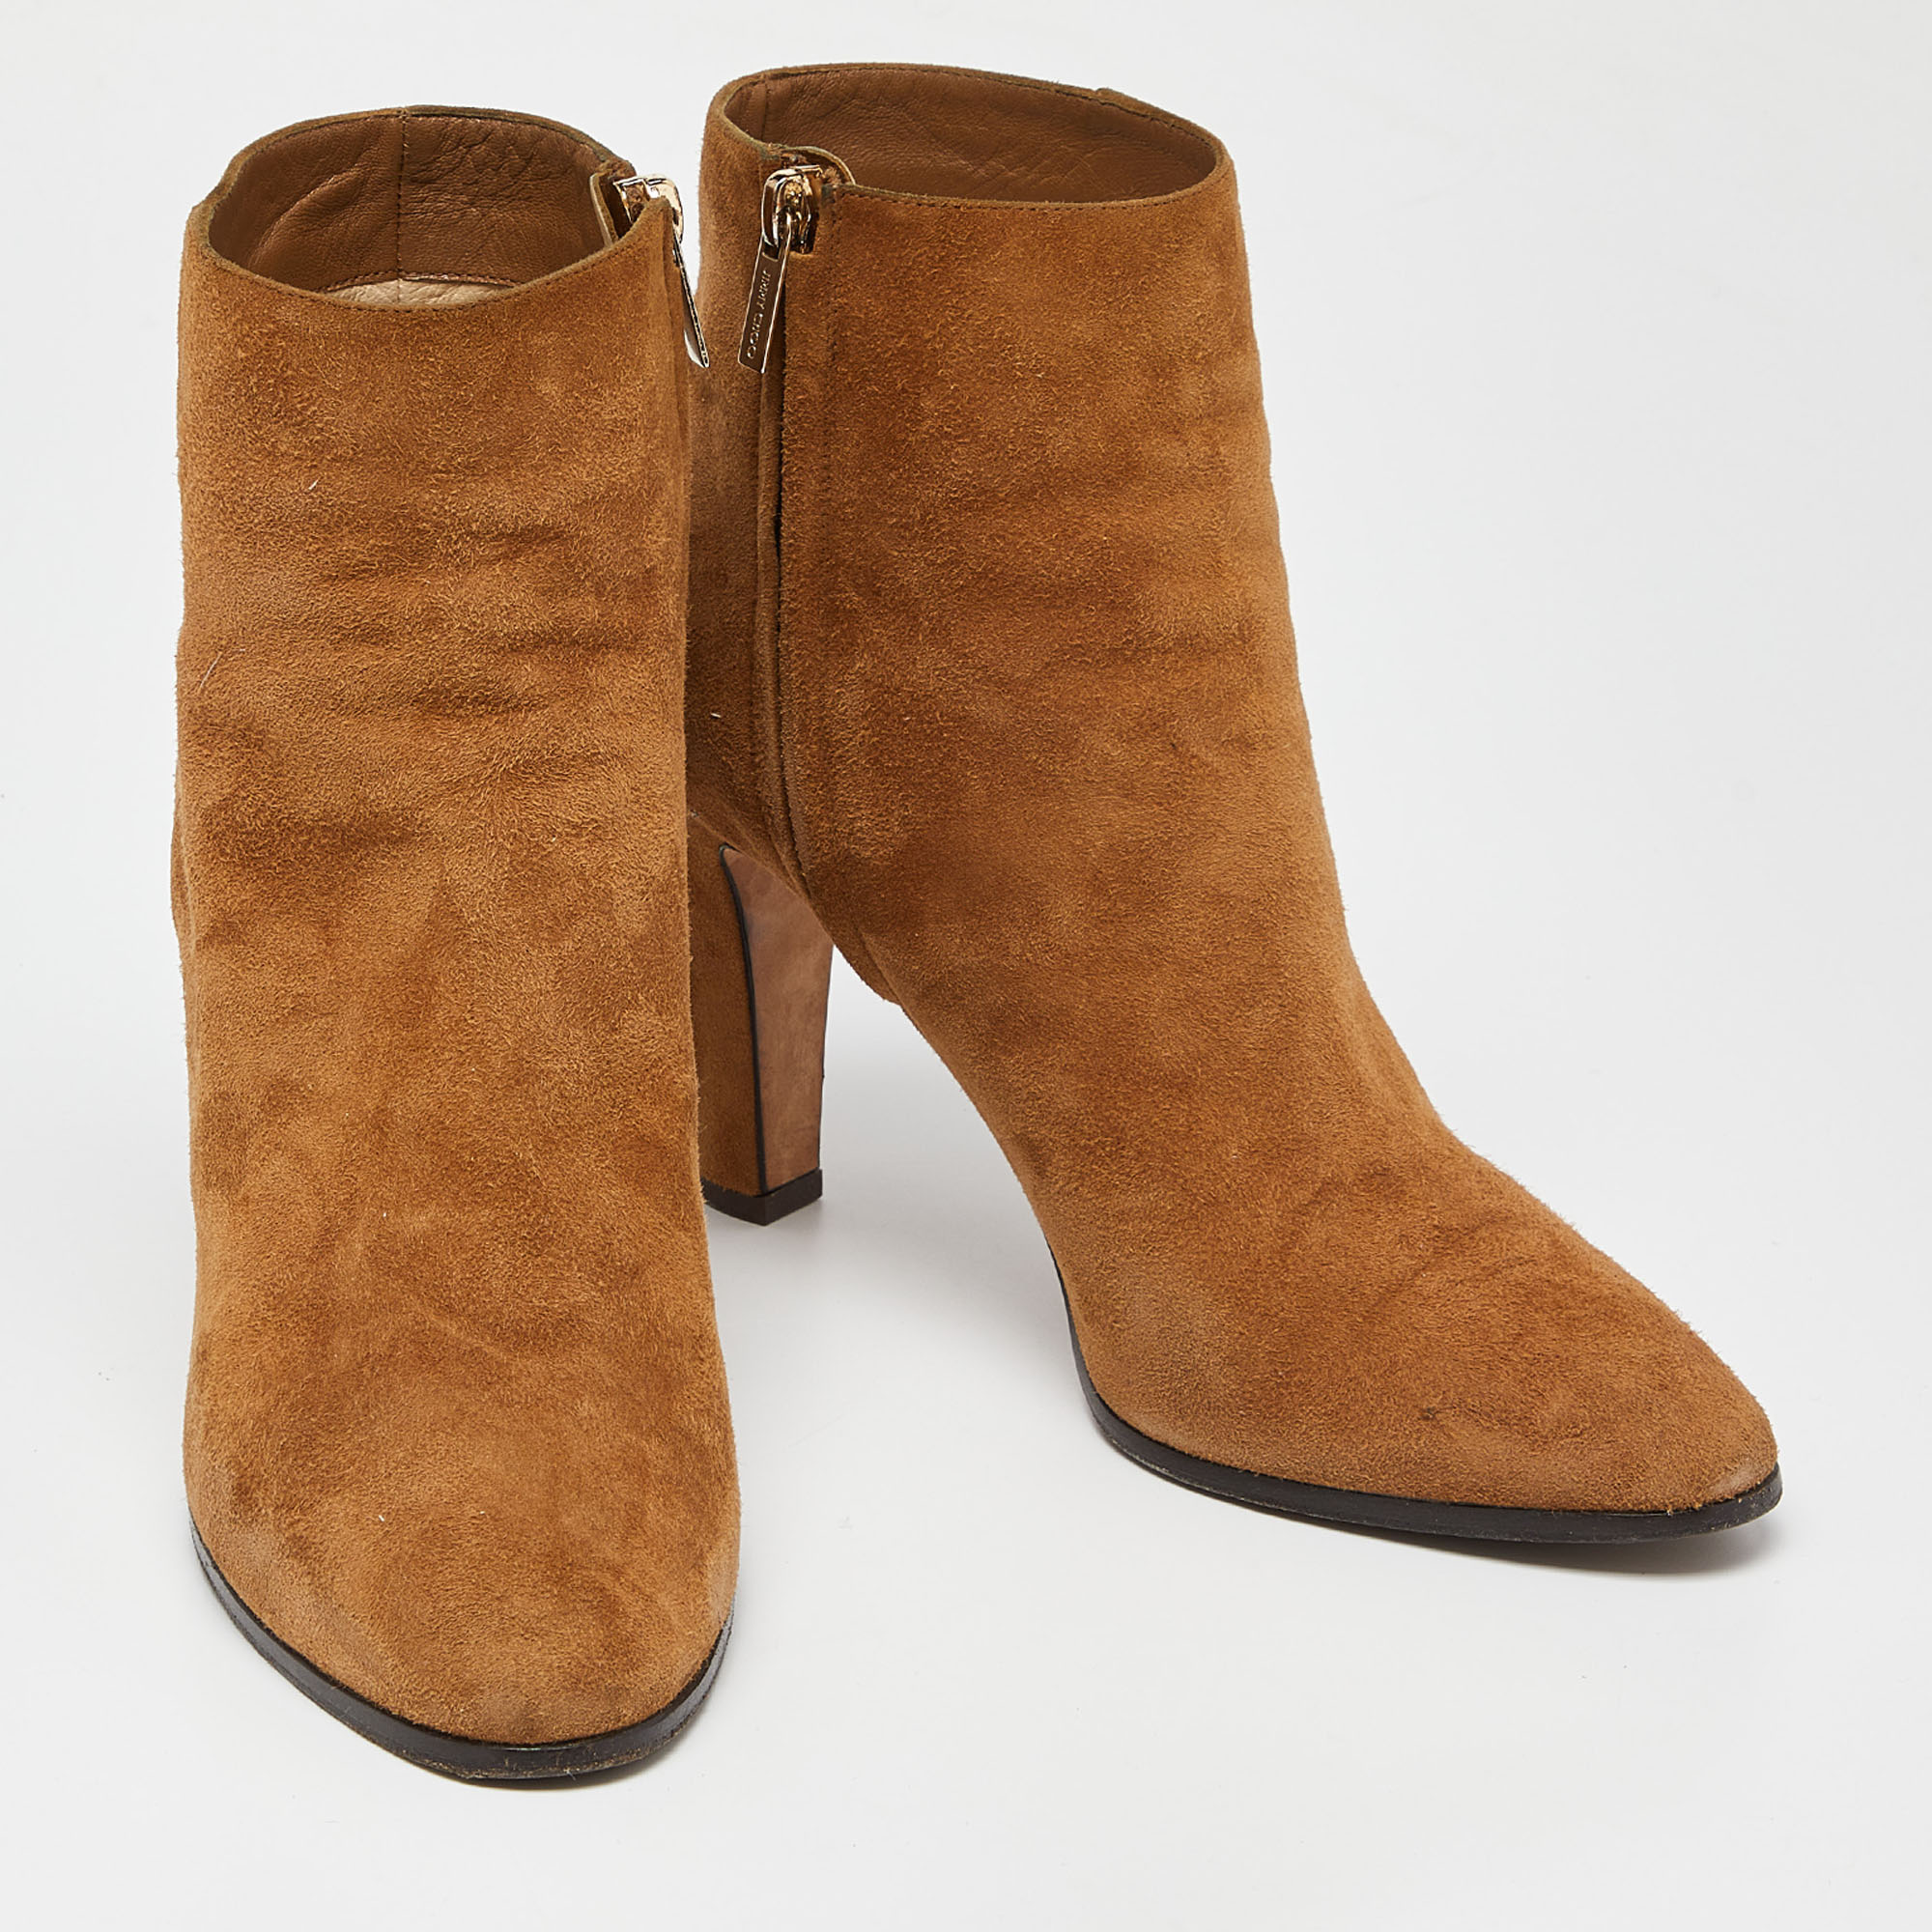 Jimmy Choo Tan Suede Ankle Length Booties Size 40.5